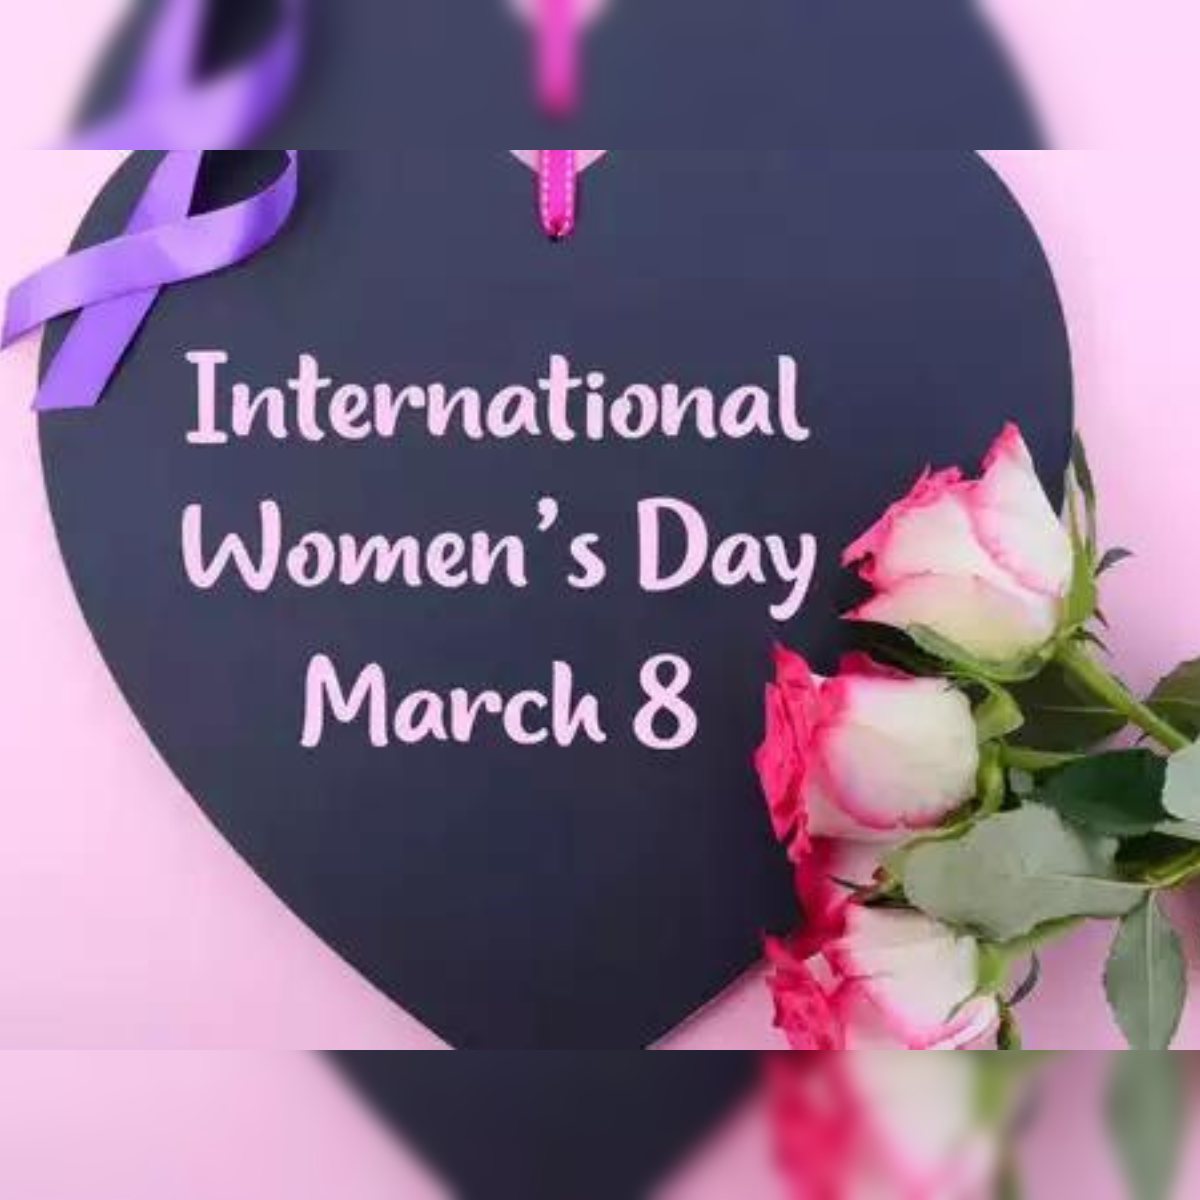 Happy Women's Day 2024: Wishes, Messages, Quotes, Images, Greetings,  Facebook & Whatsapp status - Times of India